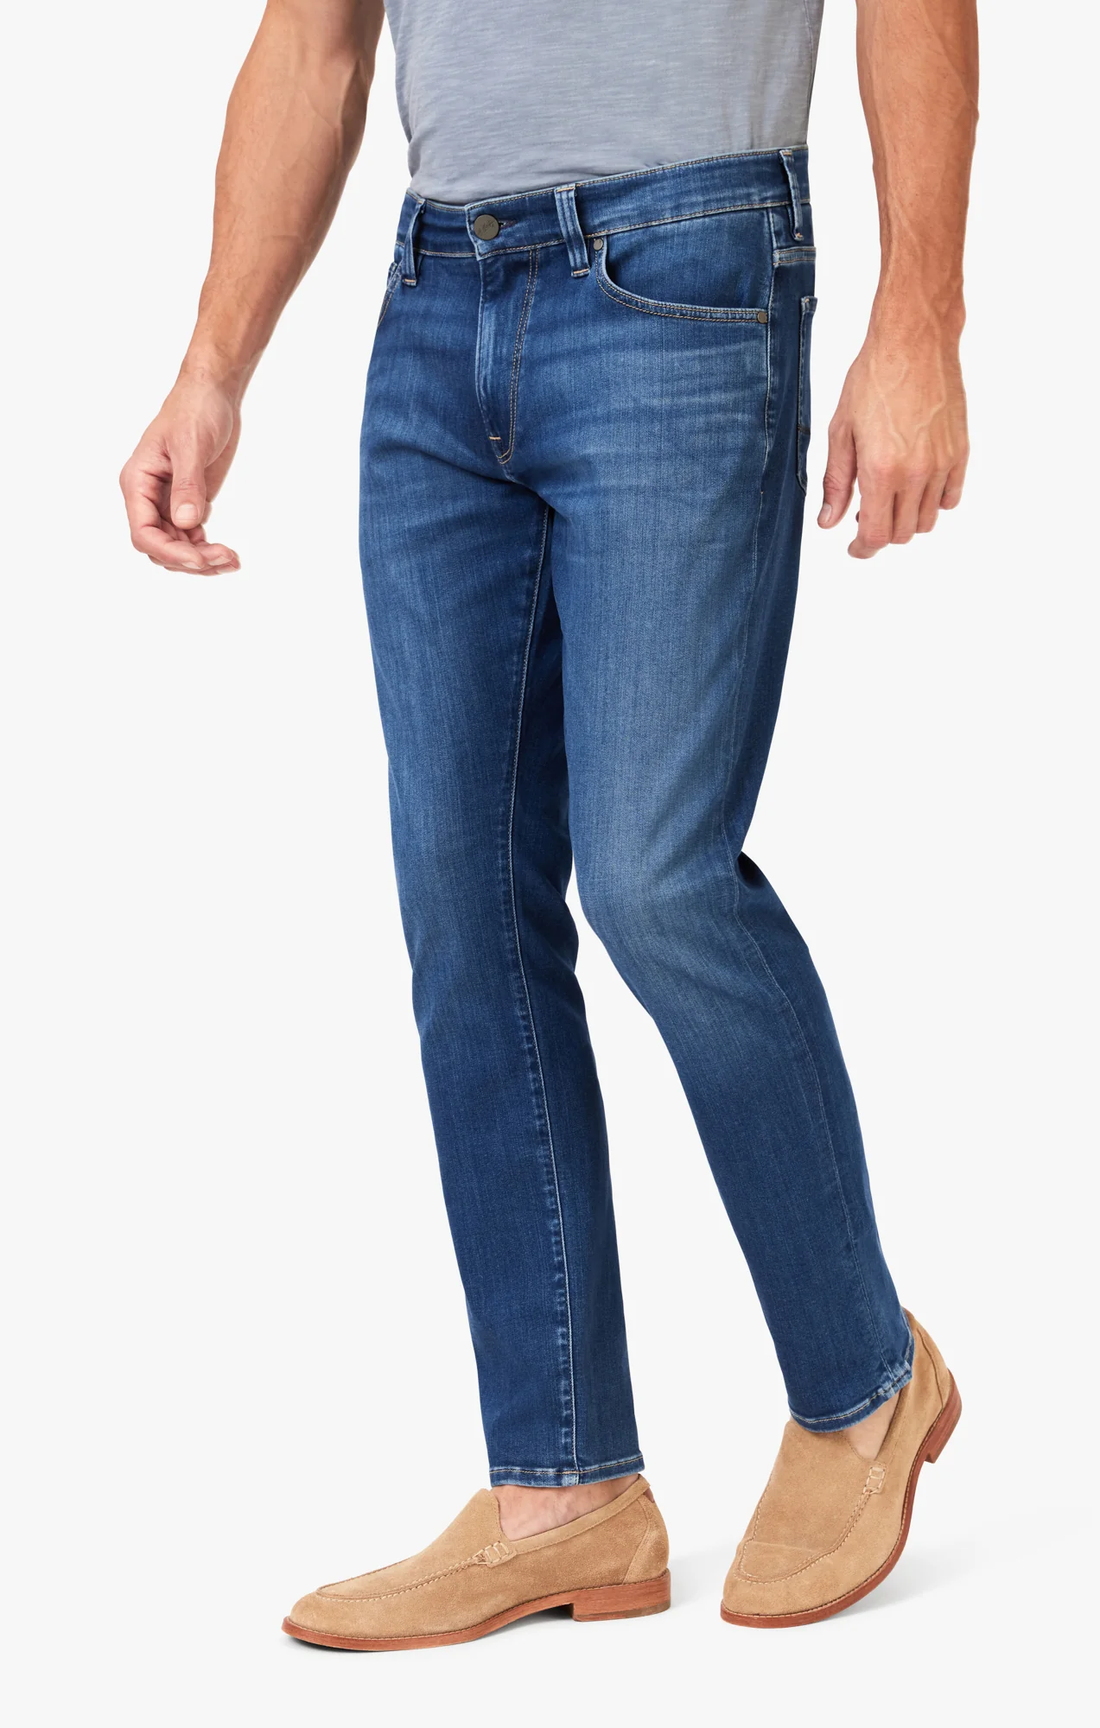 Courage Refinded Jeans